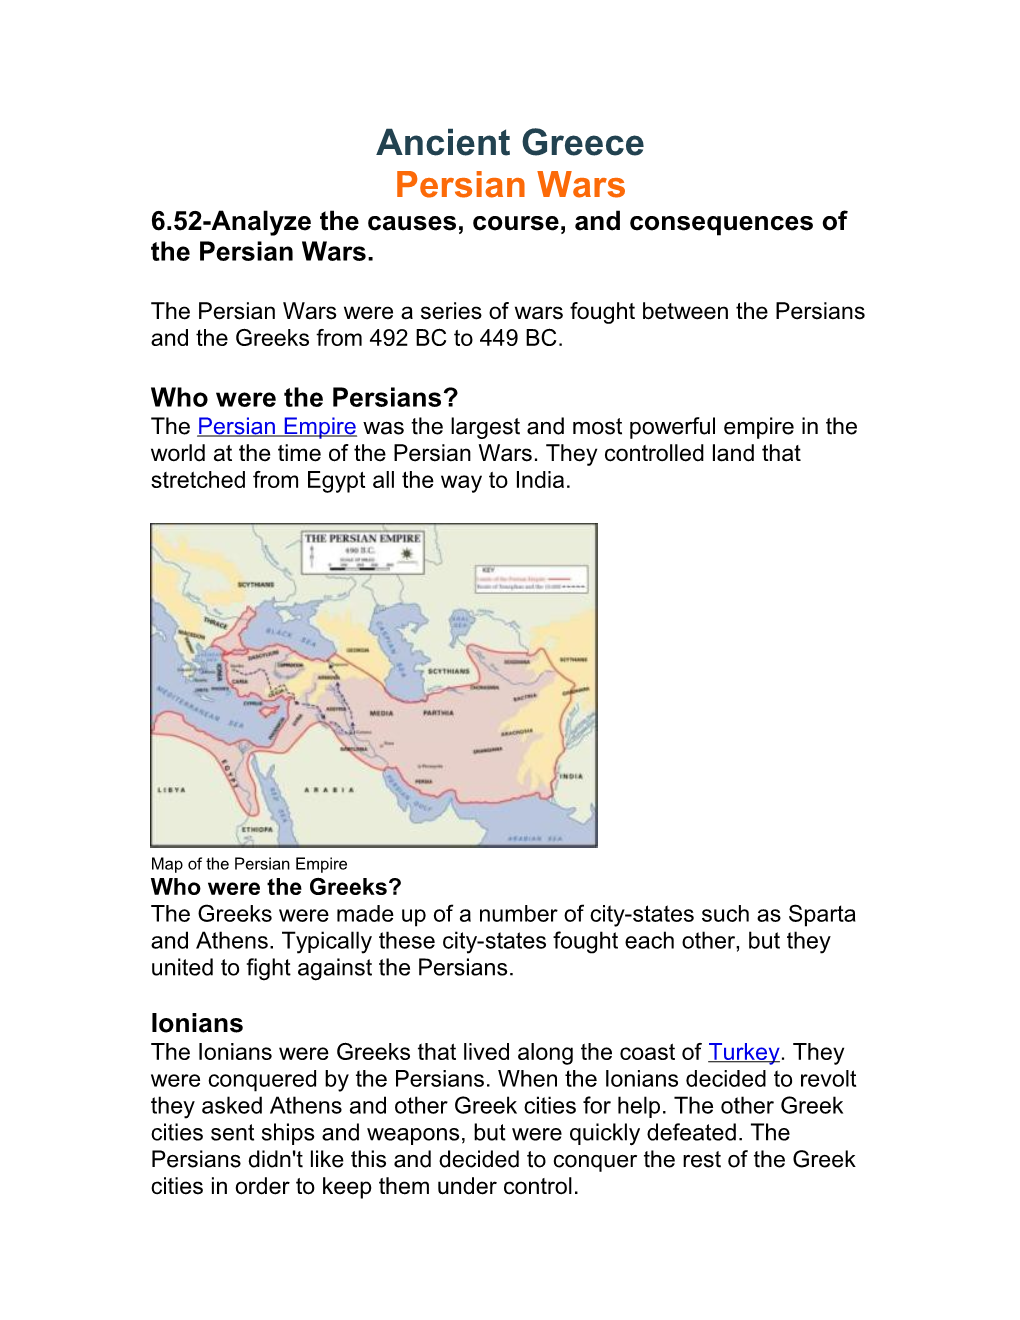 6.52-Analyze the Causes, Course, and Consequences of the Persian Wars